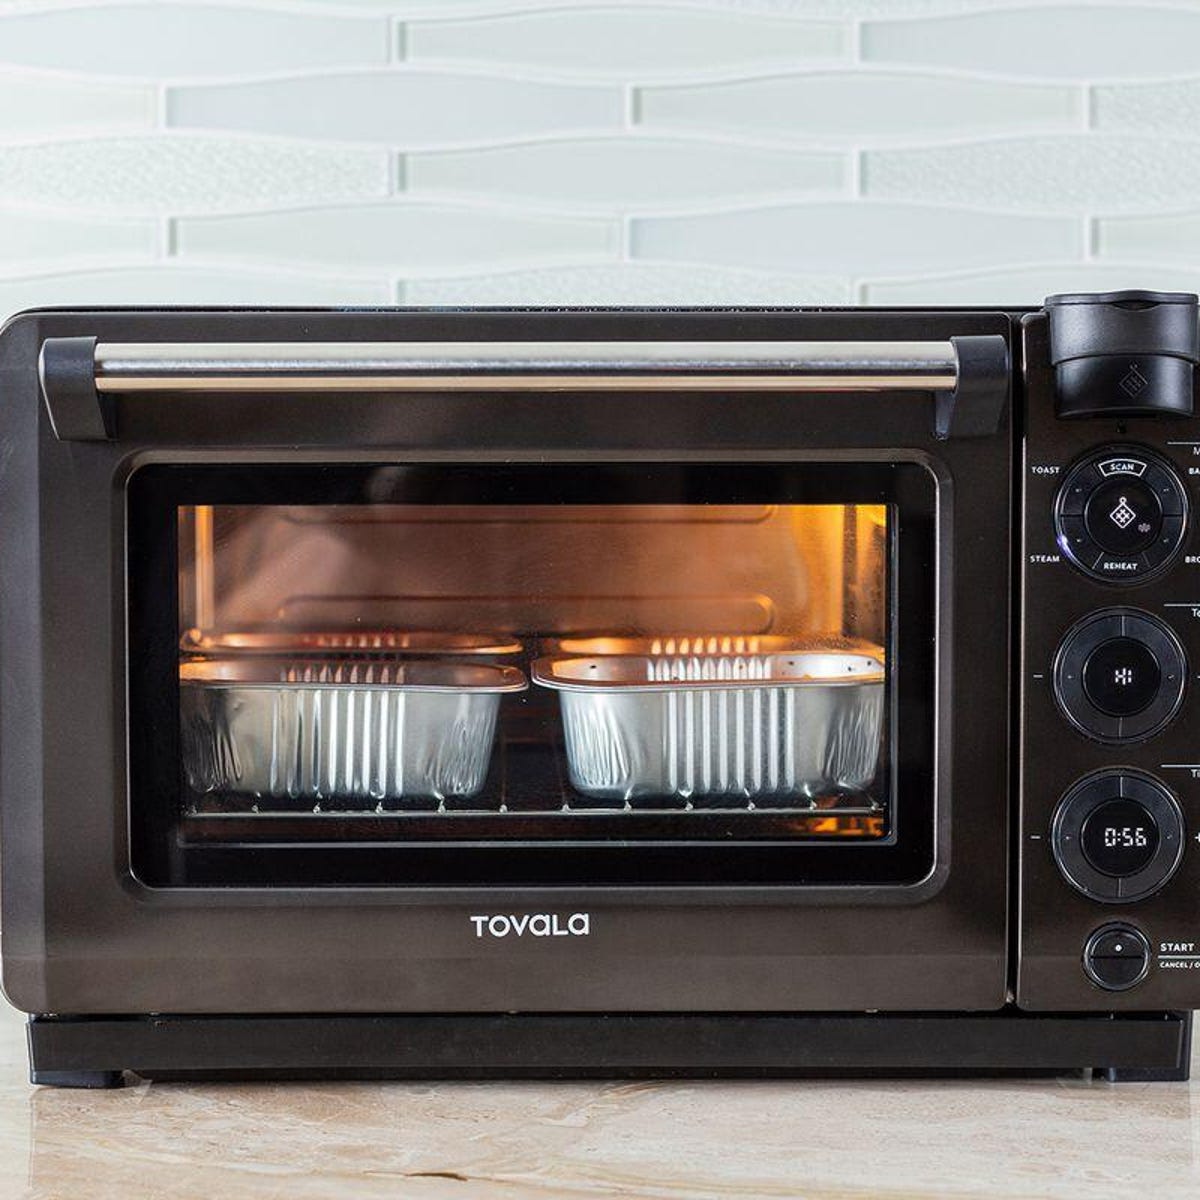 Normally $300, the Tovala Smart Oven Is Just $49 for Memorial Day Weekend -  CNET